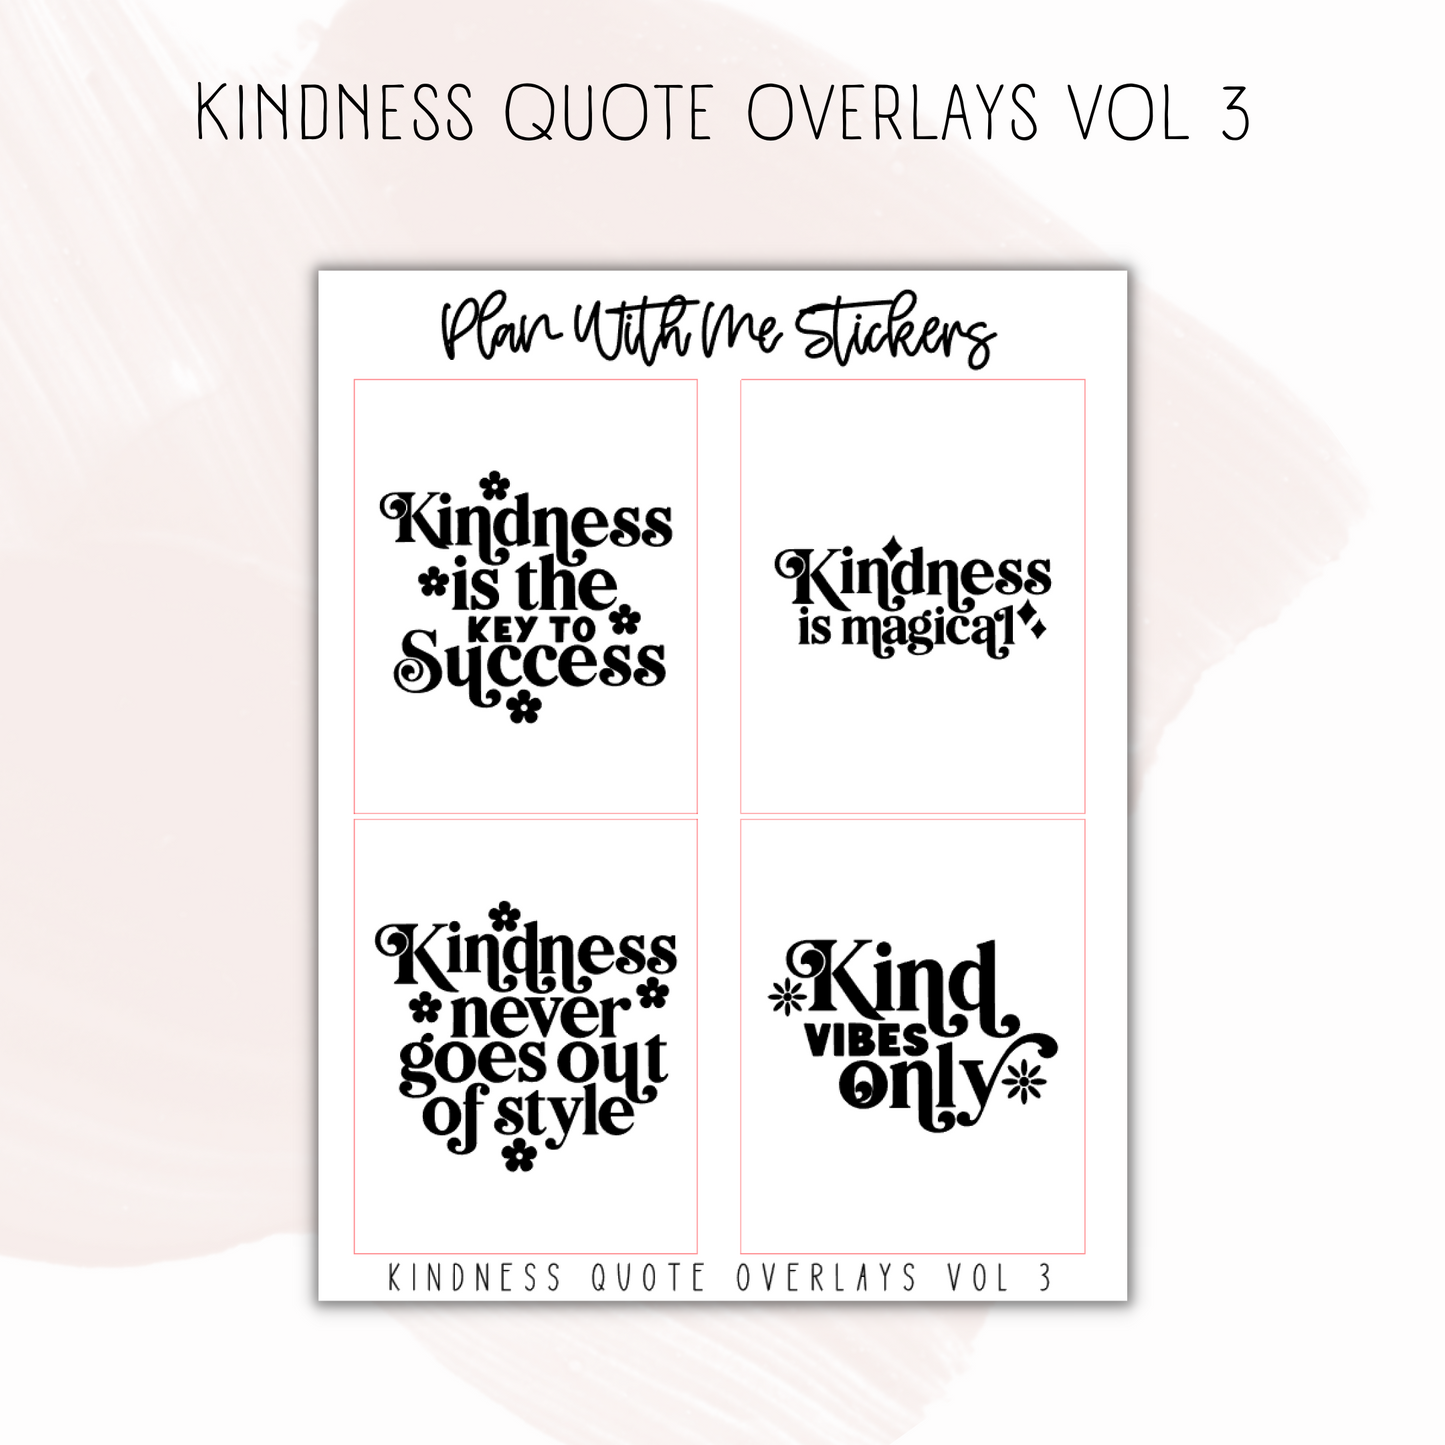 Kindness Quote Overlays Vol 3